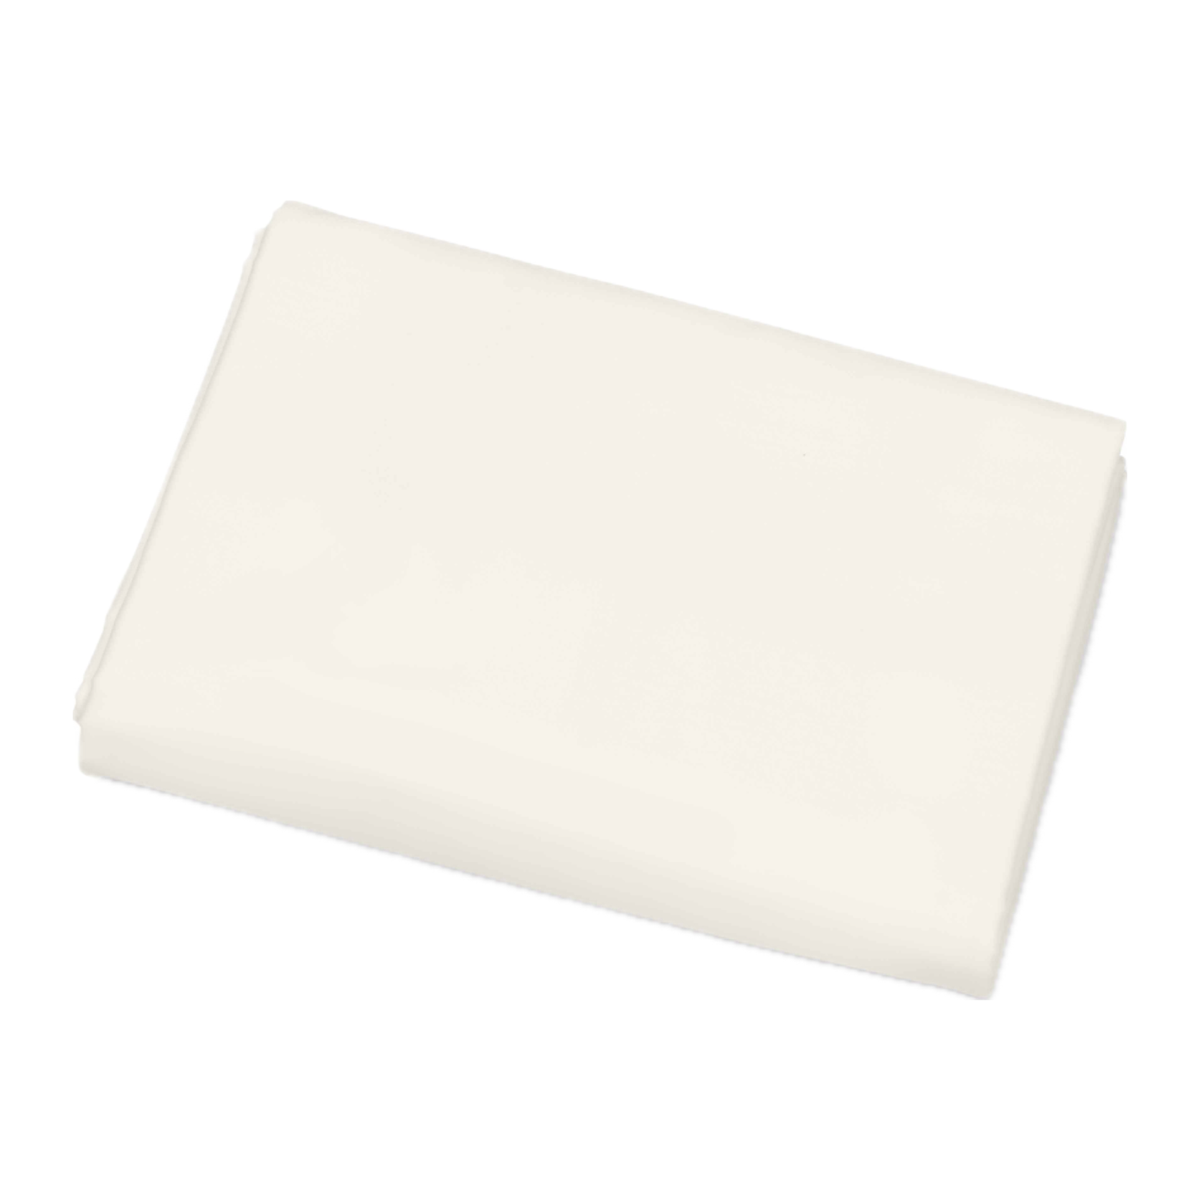 Folded Signoria Nuvola Duvet Cover in Ivory Color